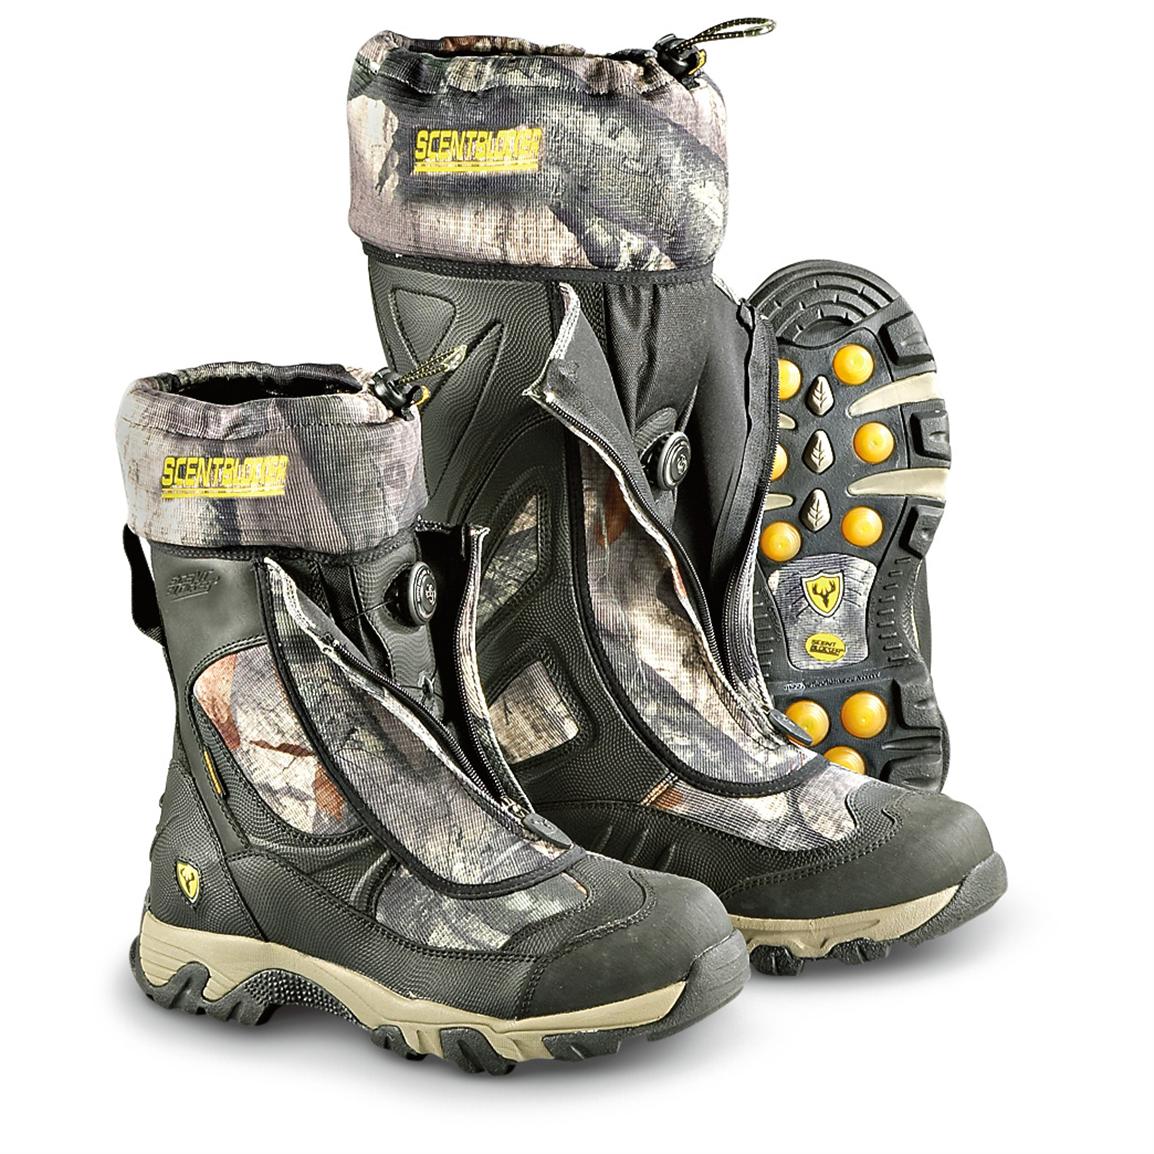 hunting boots with boa lacing system